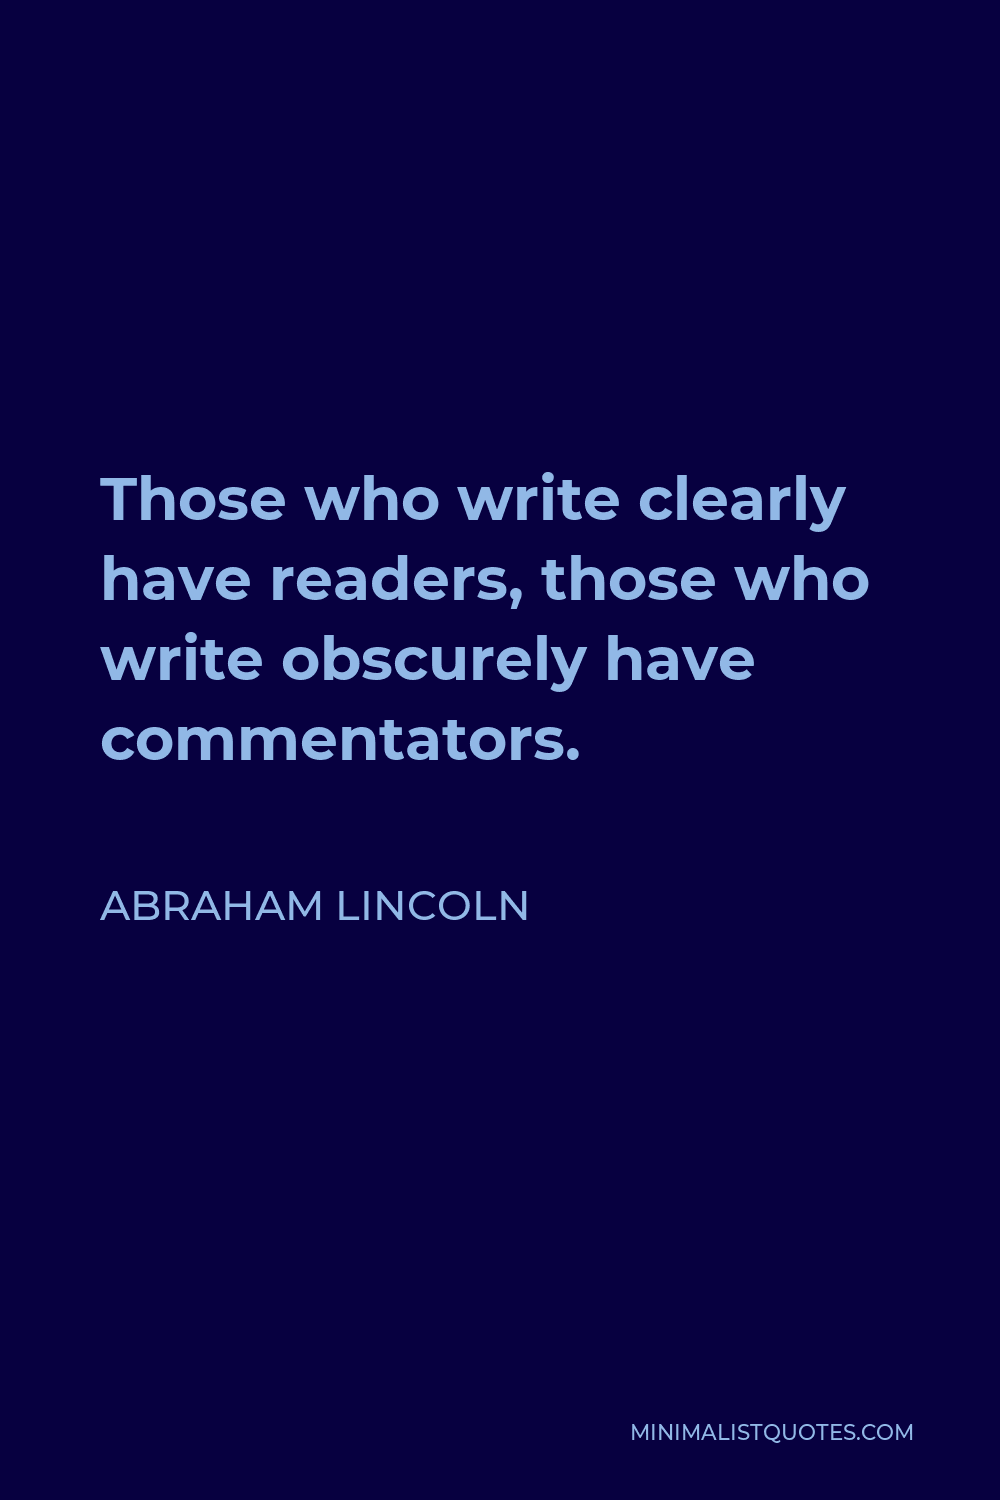 Abraham Lincoln Quote - Those who write clearly have readers, those who write obscurely have commentators.